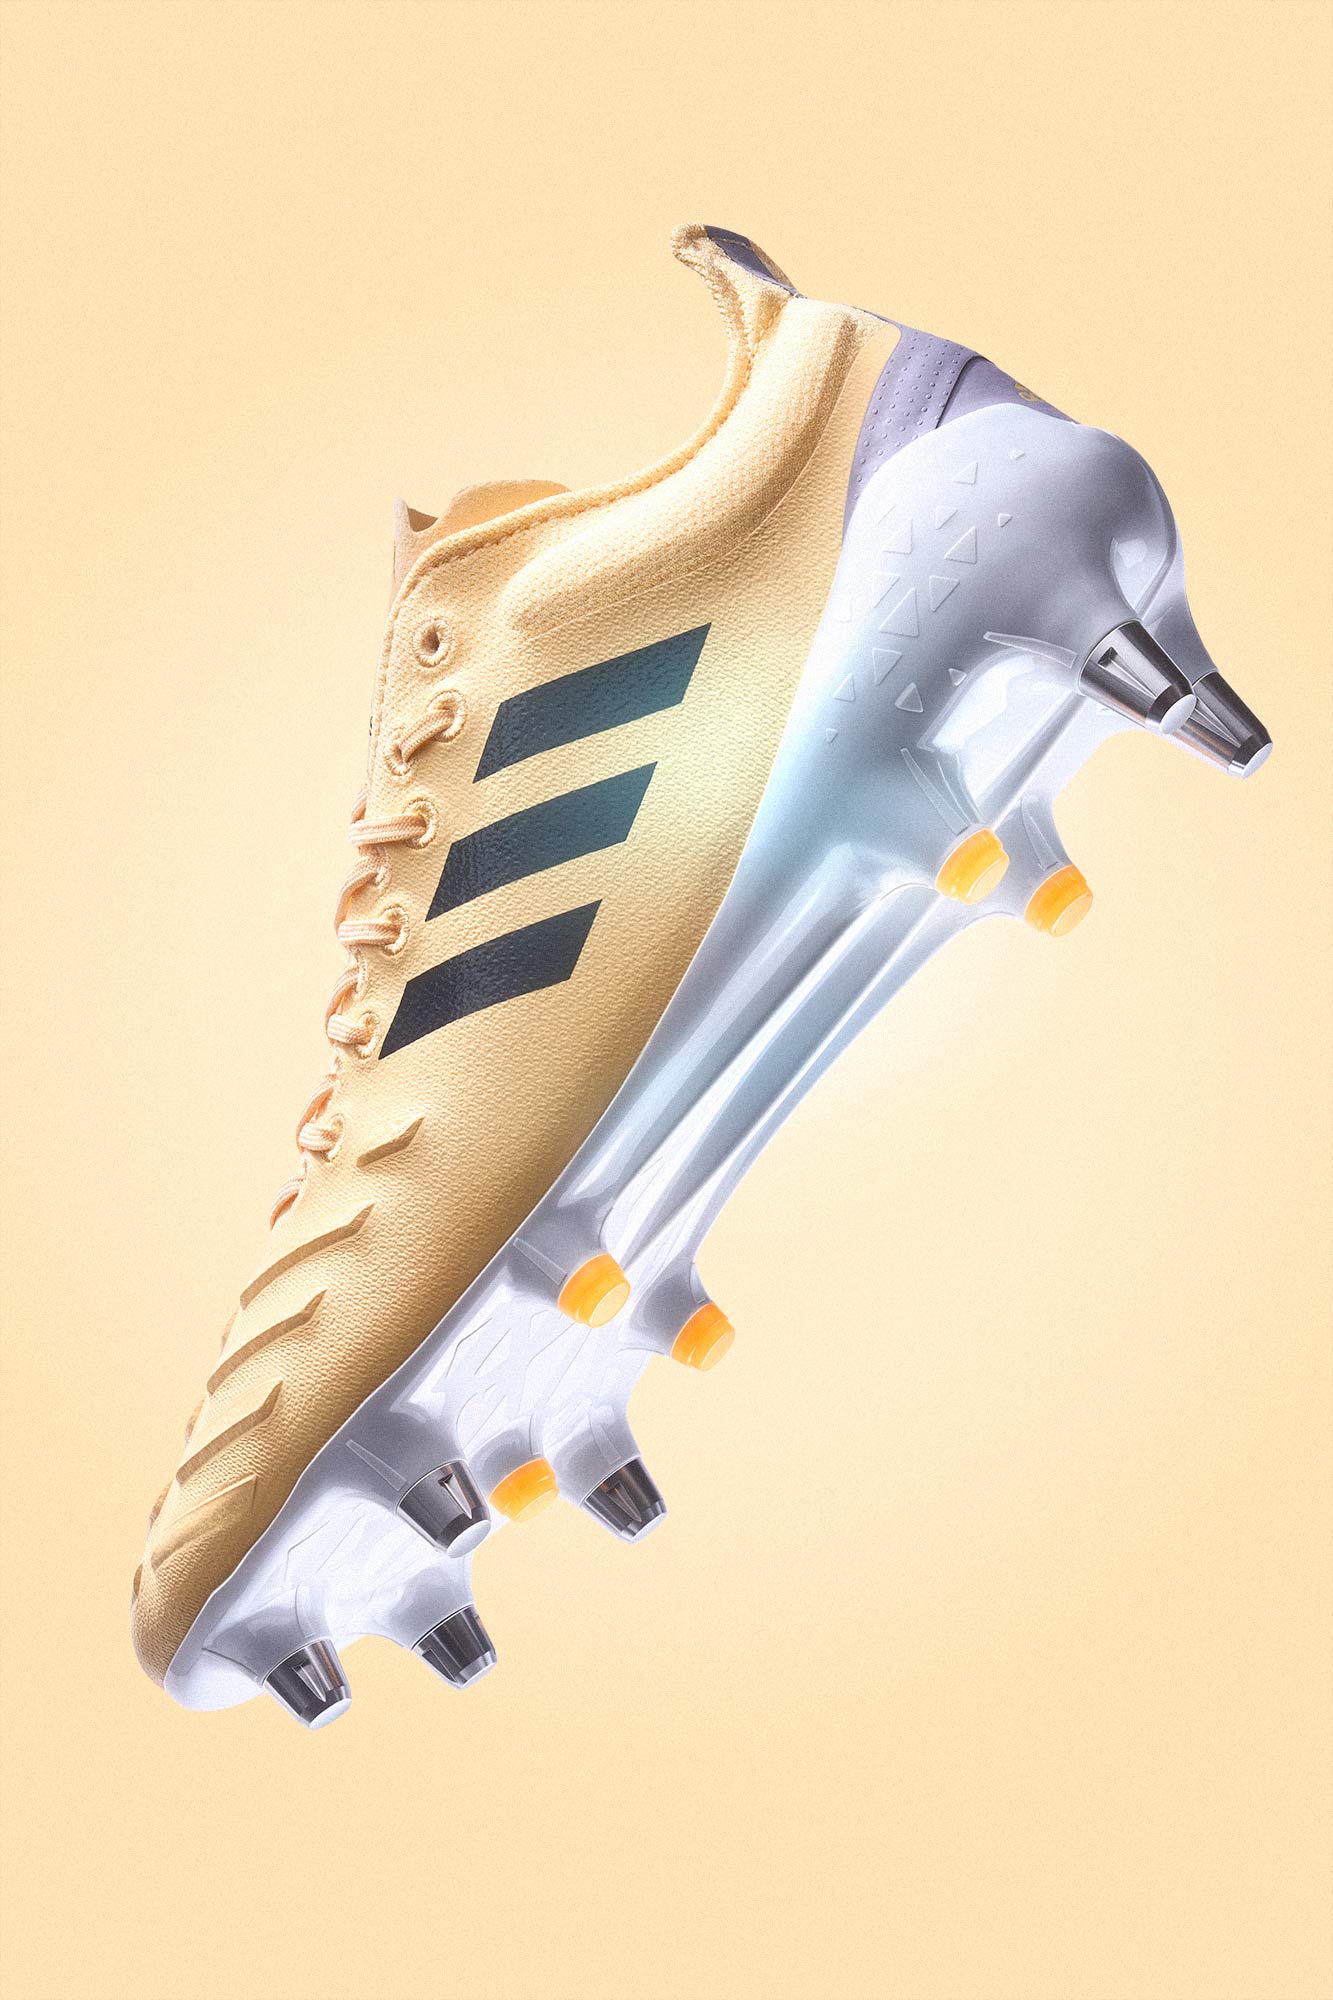 Immerse yourself in the striking imagery of the Adidas Predator XP soft ground rugby boot, meticulously photographed in a studio setting for Adidas New Zealand's cutting-edge print campaign.